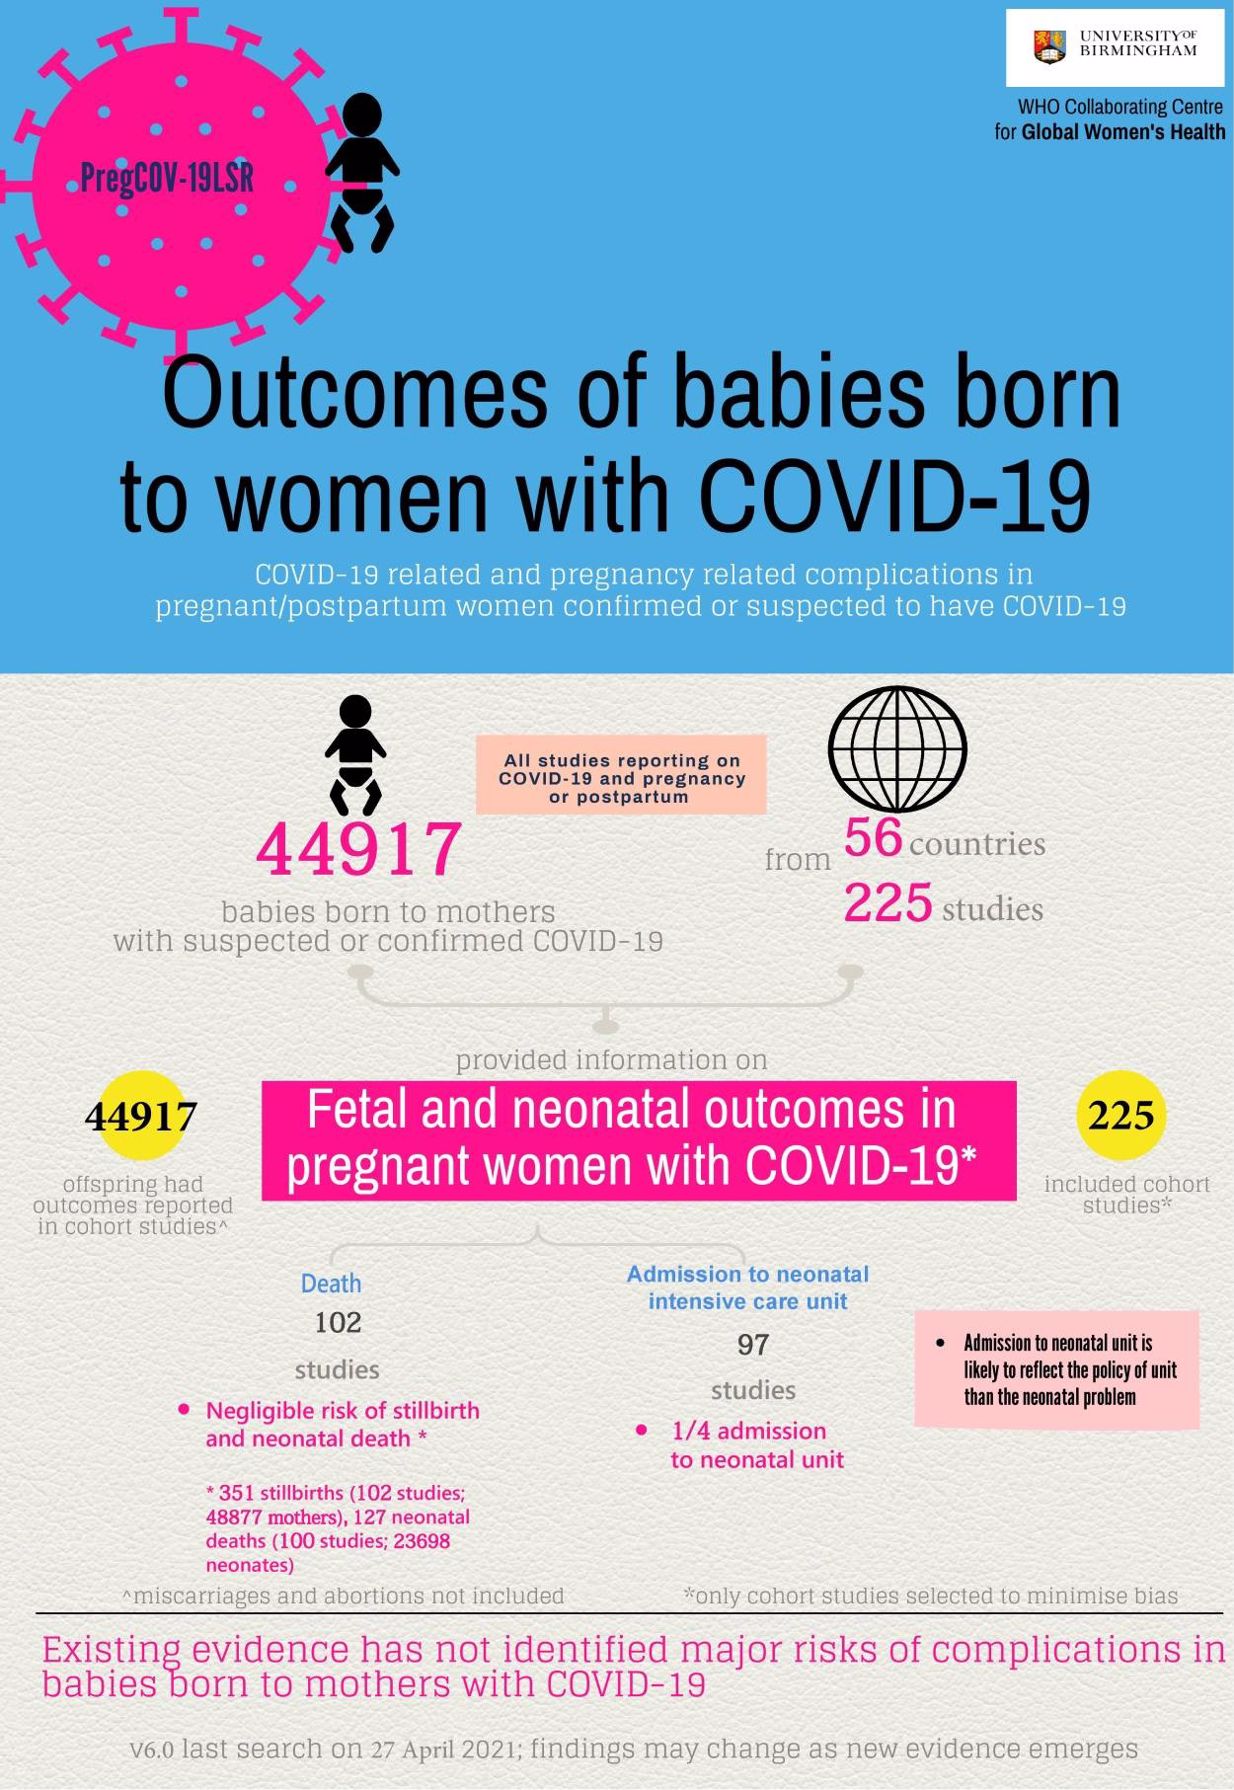 Diagram explaining fetal and neonatal outcomes in pregnant women with Covid-19 as described below